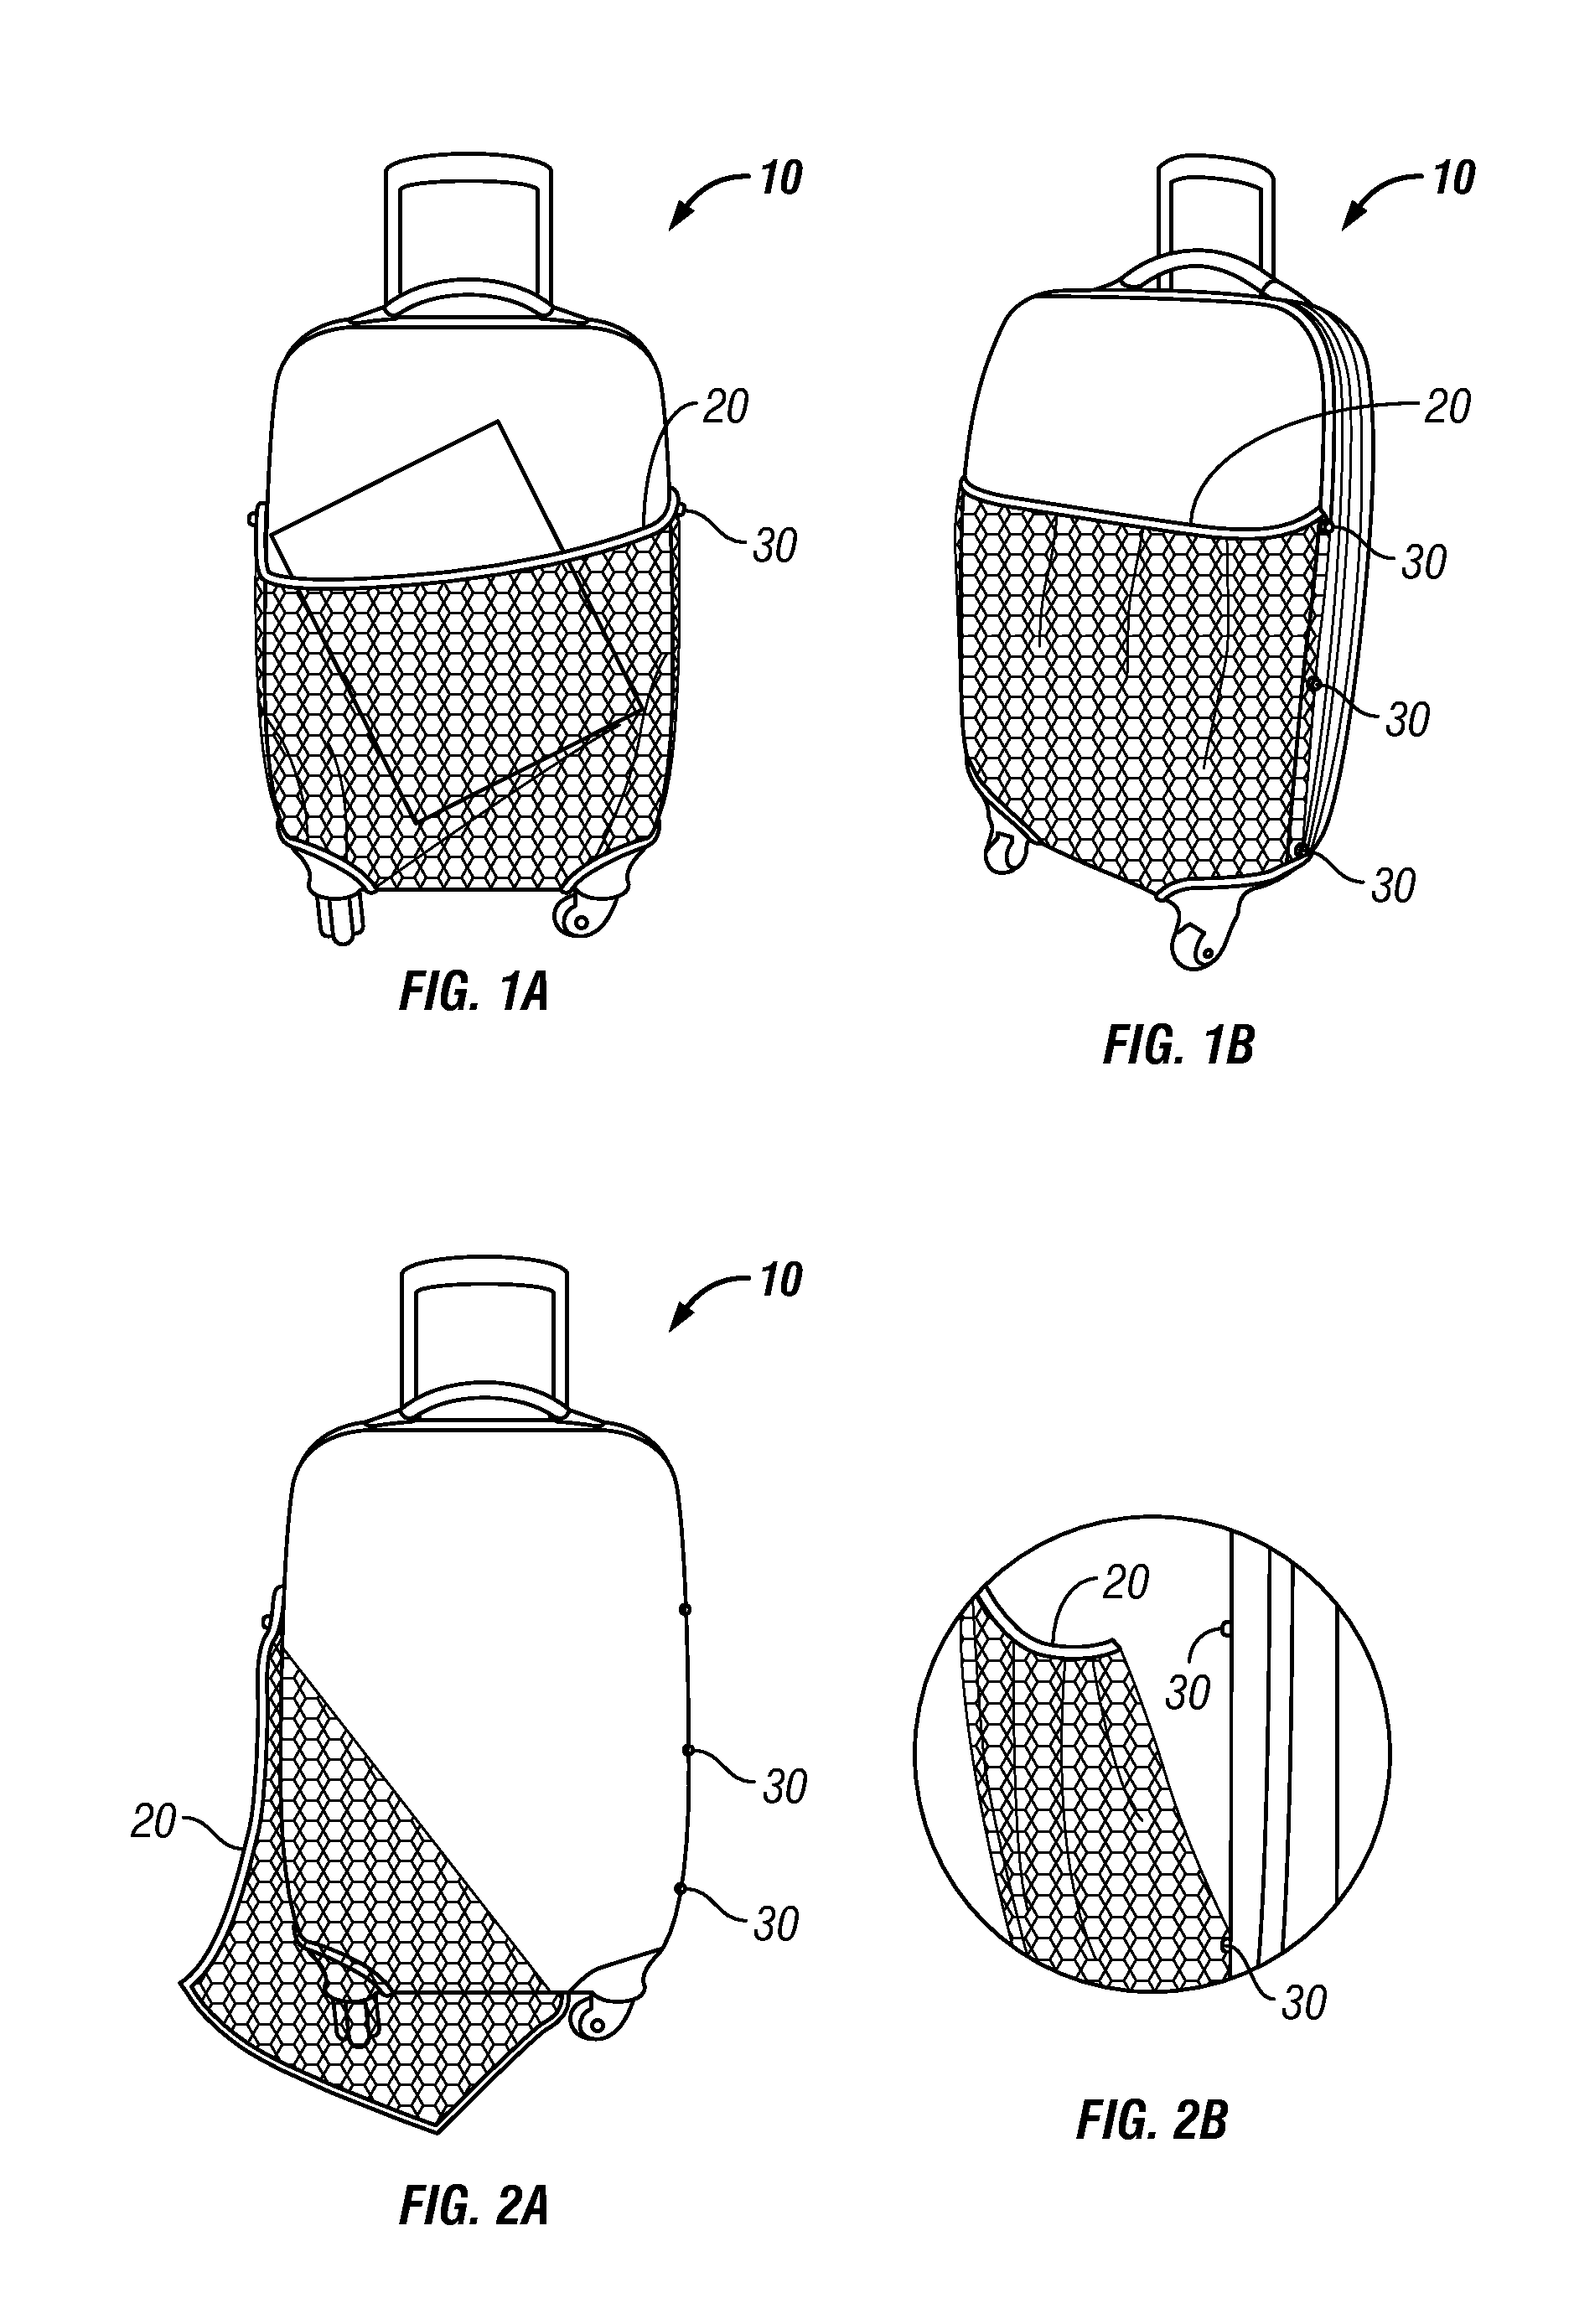 Luggage with detachable pocket